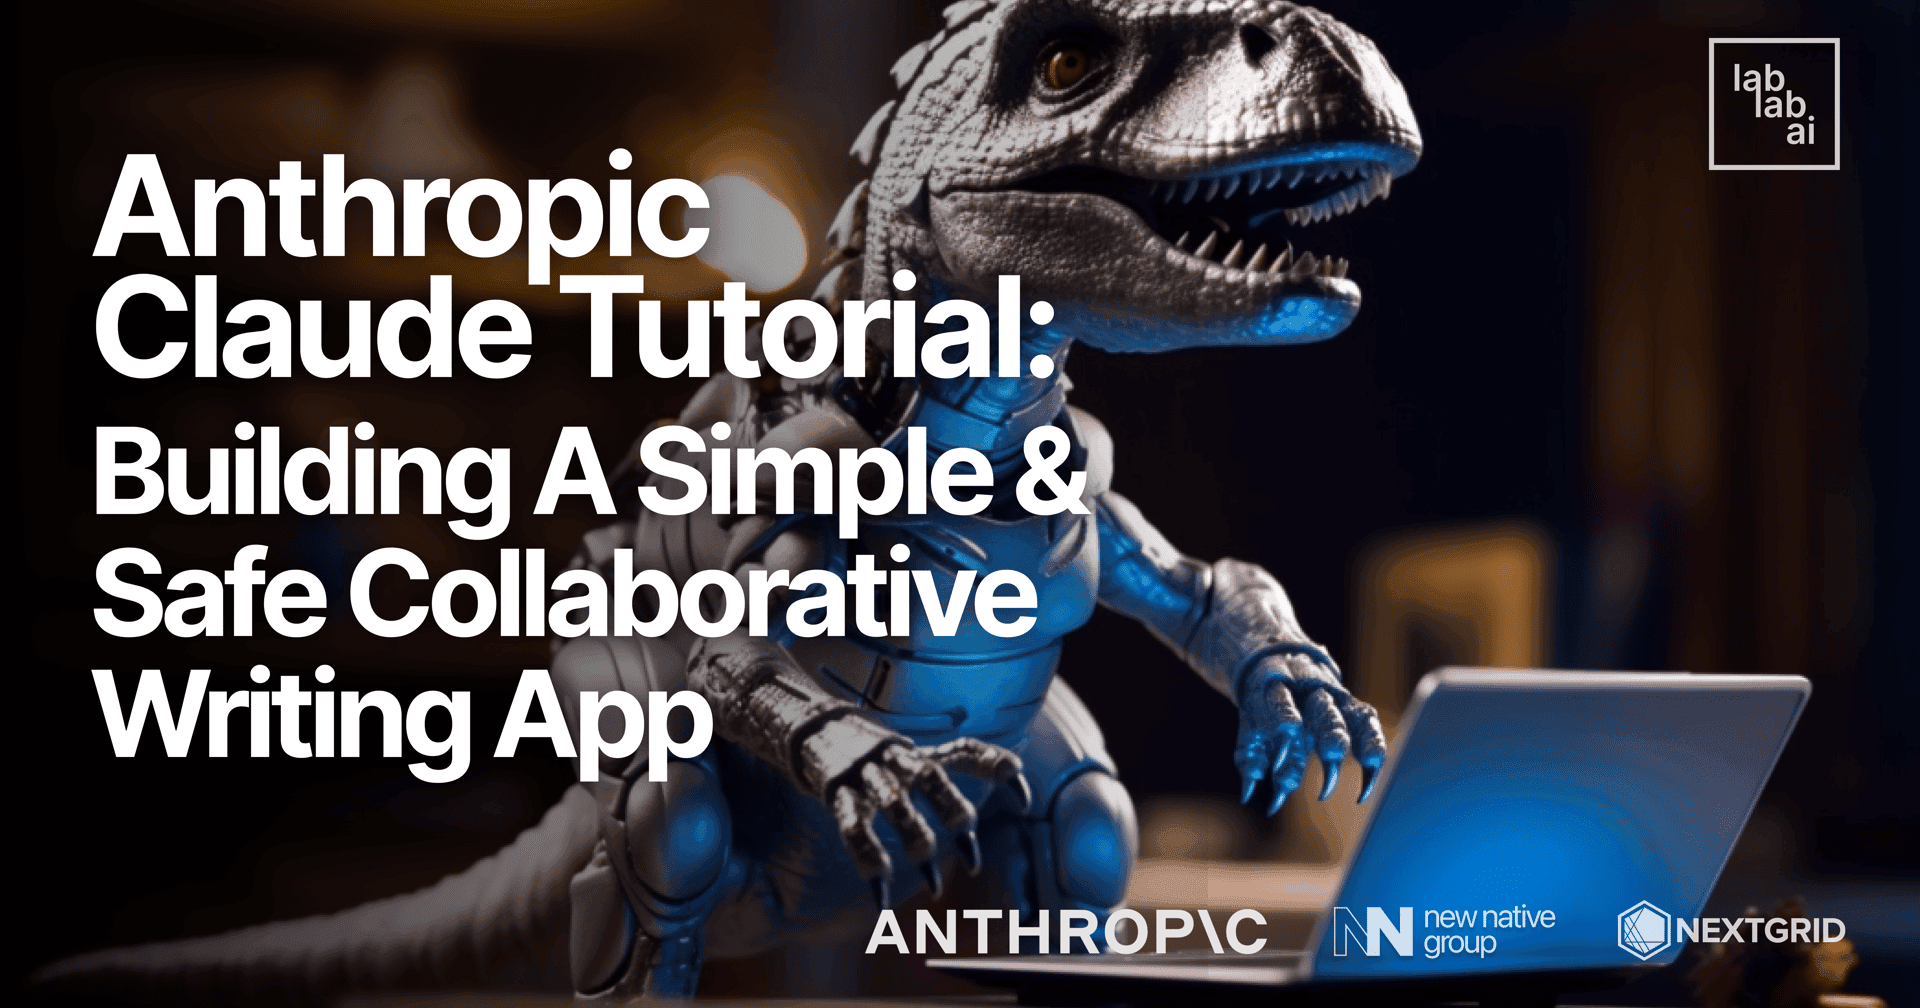 Anthropic Claude Tutorial: Building a Simple and Safe Collaborative Writing App